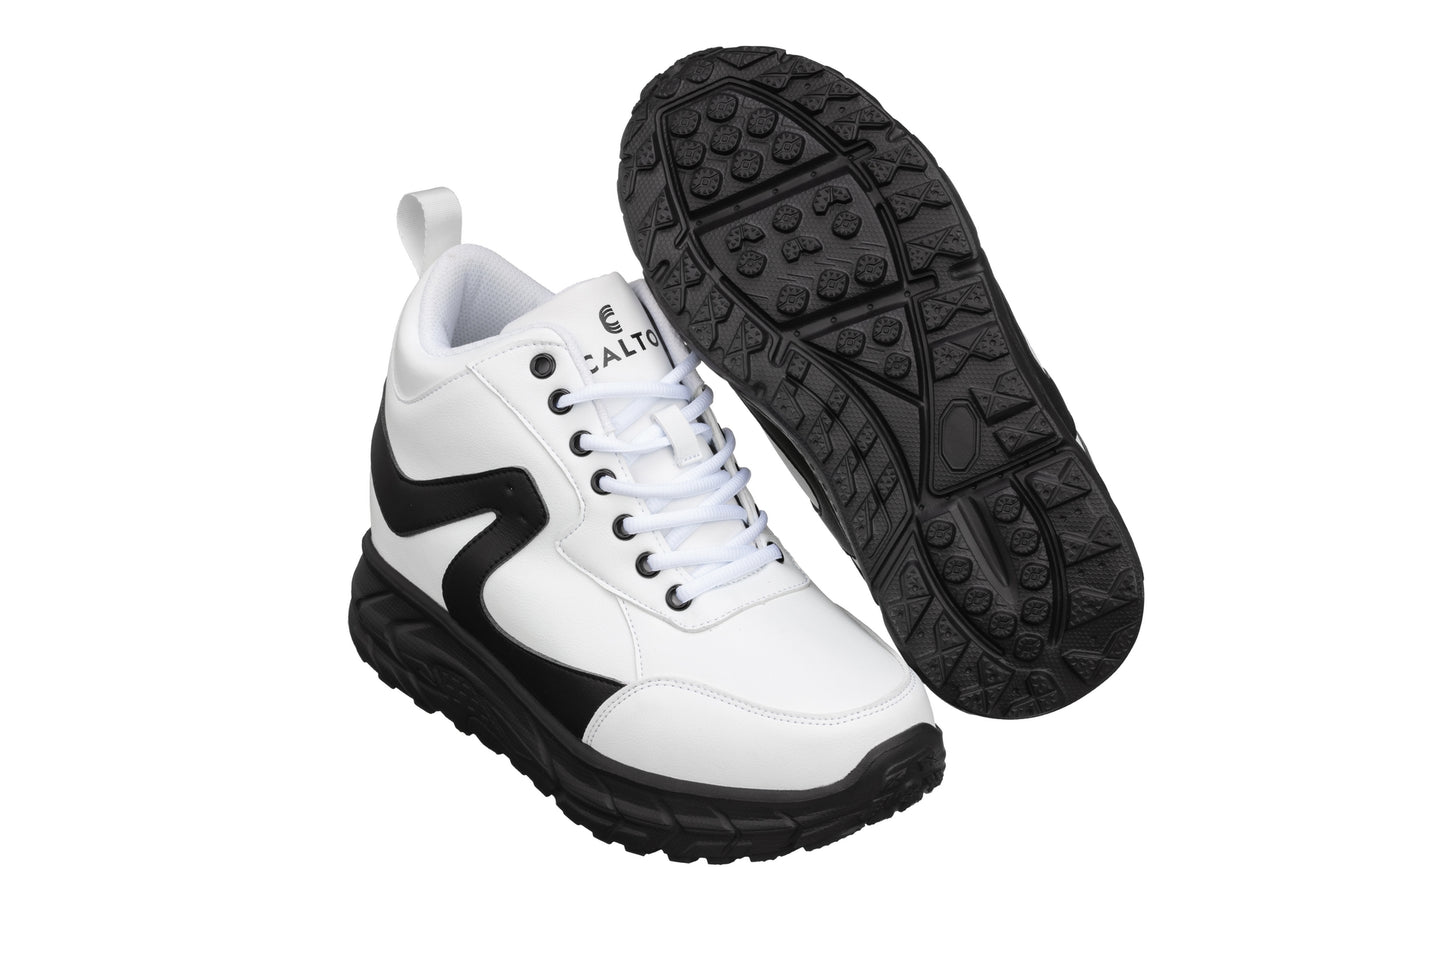 Elevator shoes height increase CALTO - S22773 - 4 Inches Taller (White/Black) - Hiking Style Boots